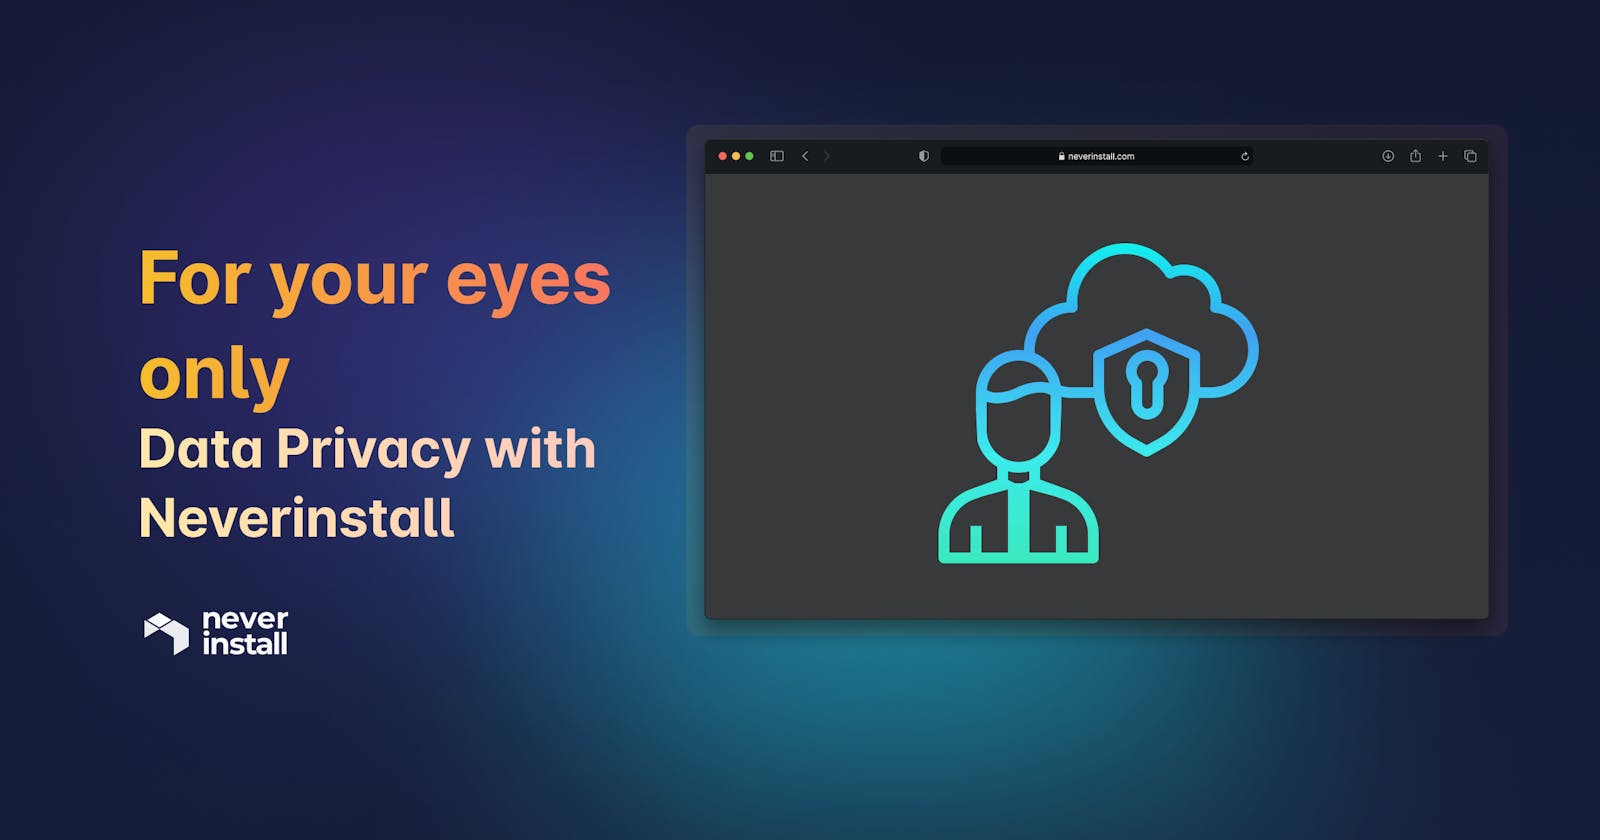 For your eyes only: Data Privacy with Neverinstall